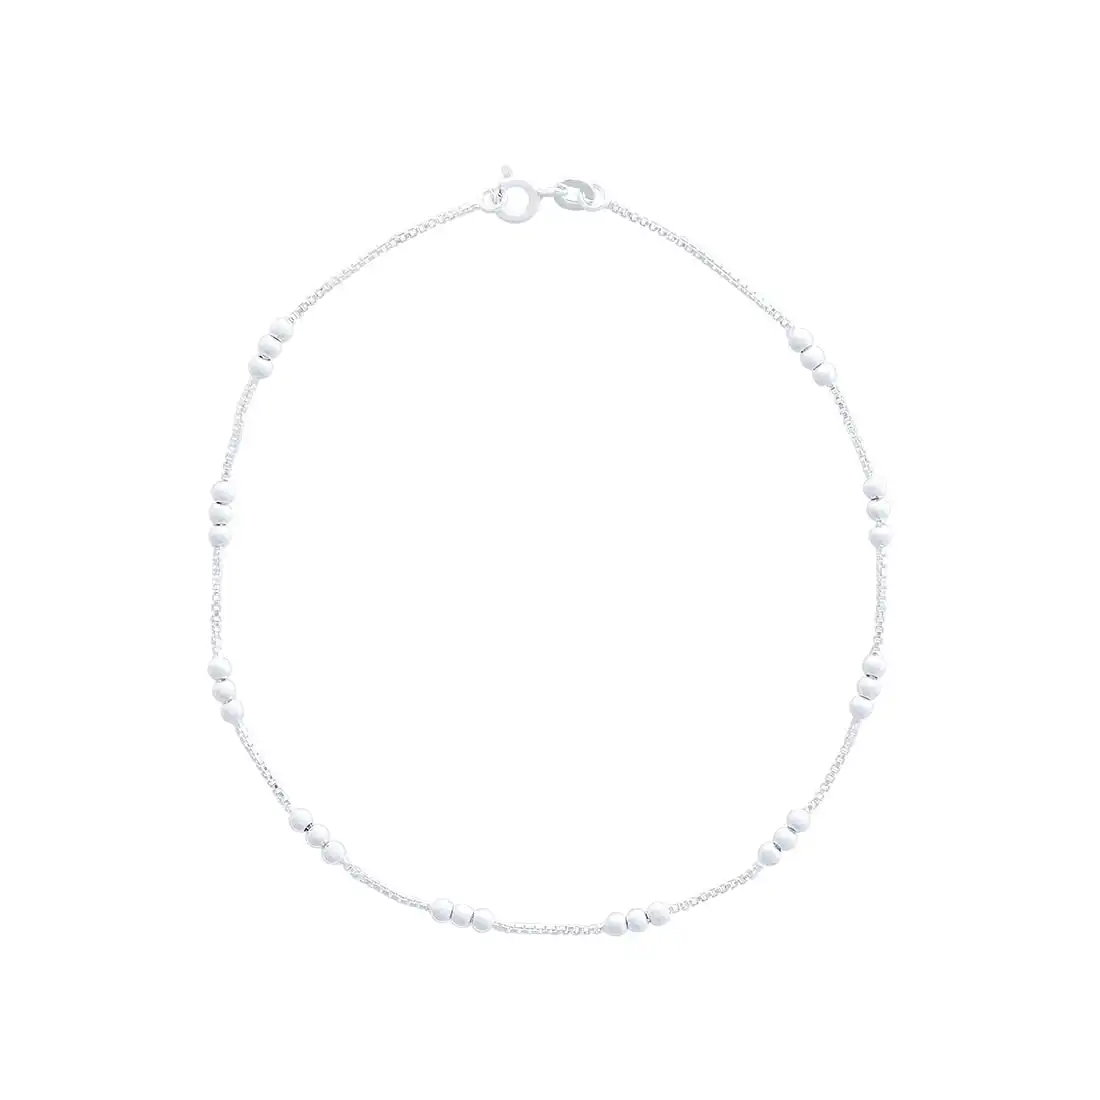 25cm Sterling Silver Ball Station Chain Anklet